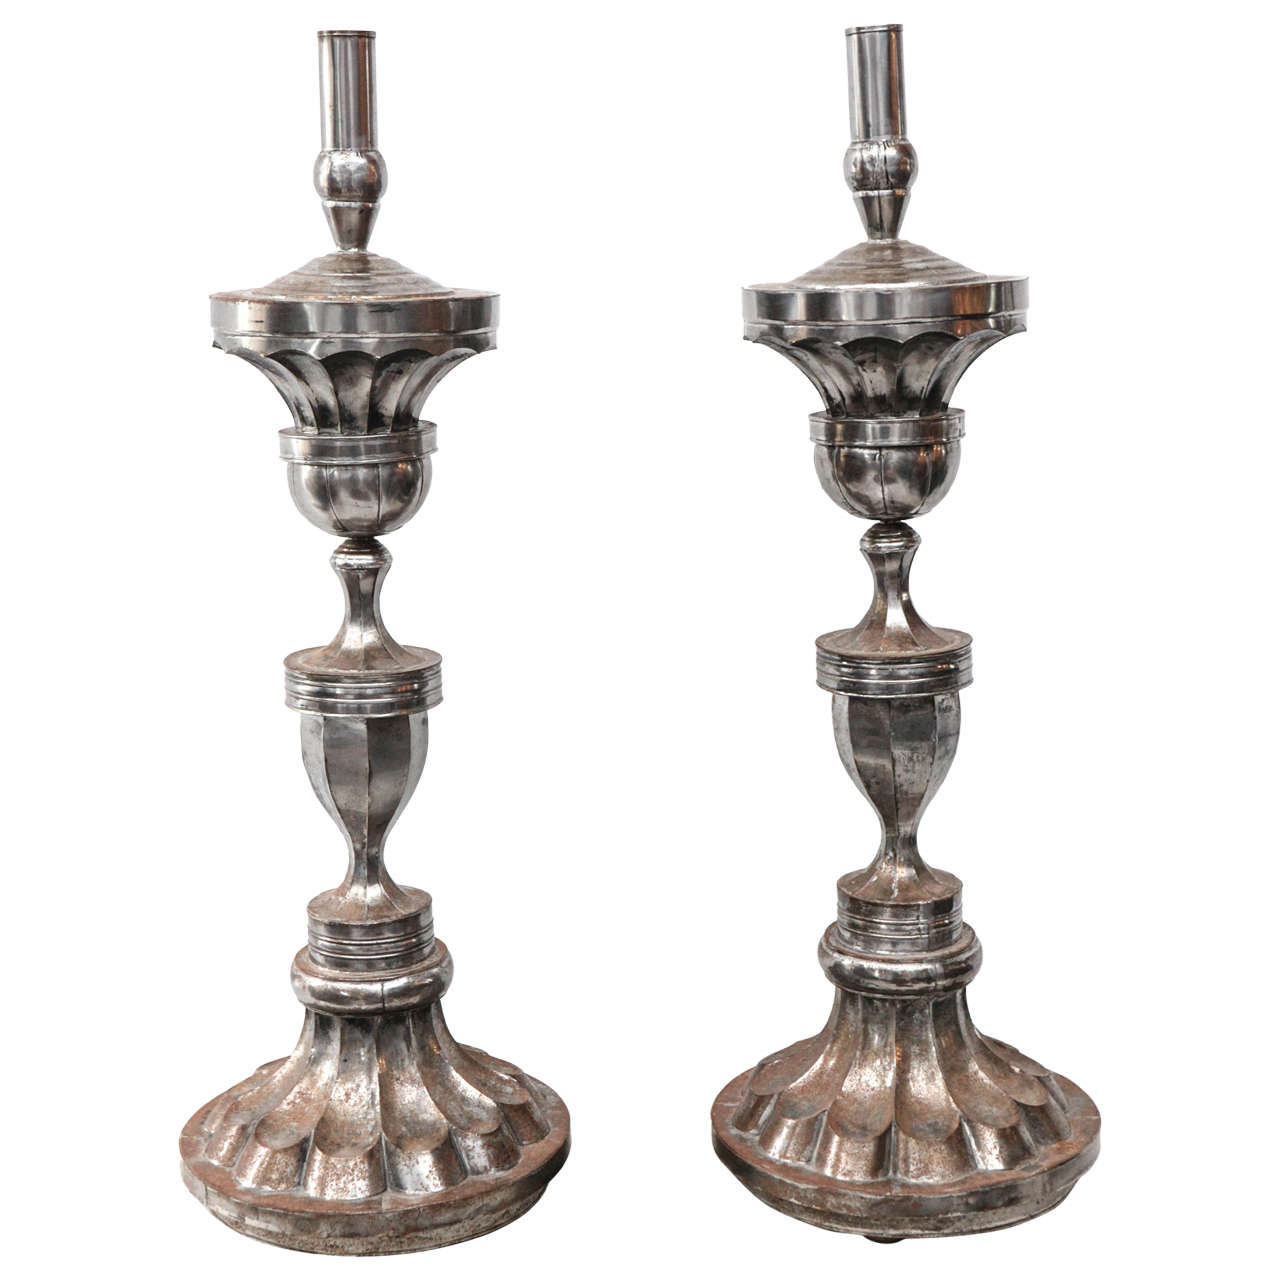 Pair of Large Ornate Pricket Candle Sticks